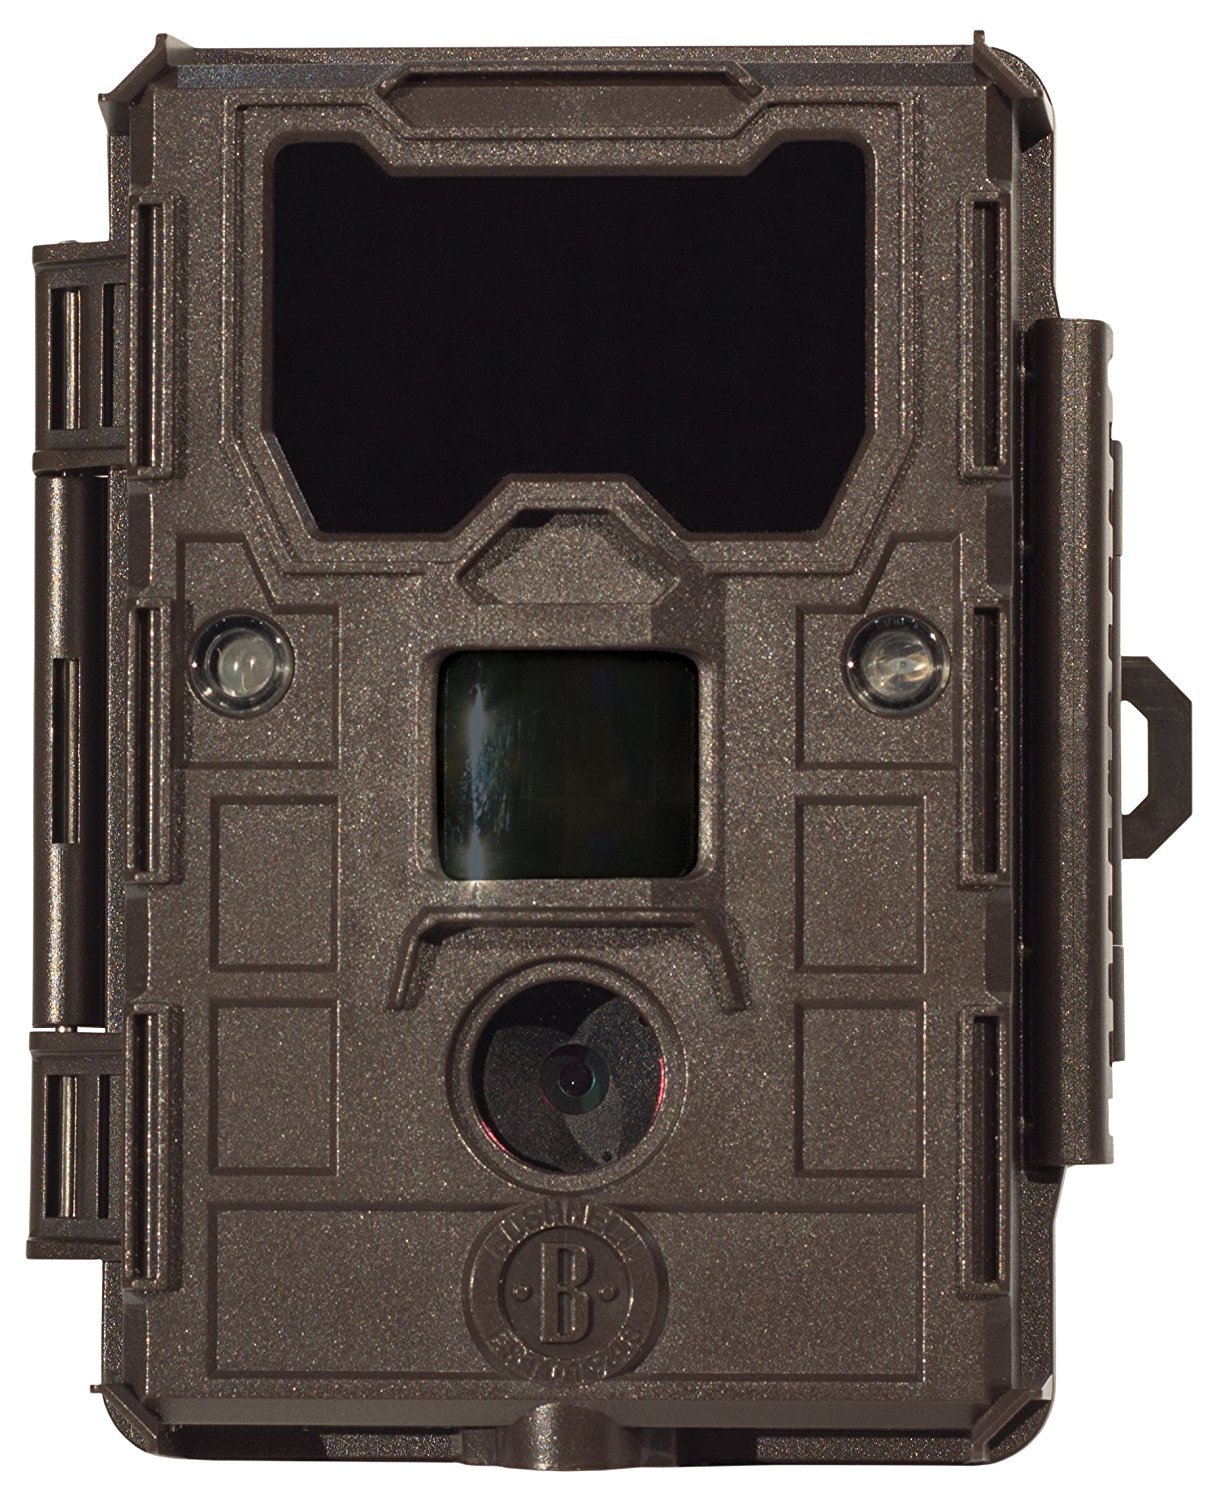 bushnell, trail camera, trophy cam, hunting, fishing, cyber monday, amazon